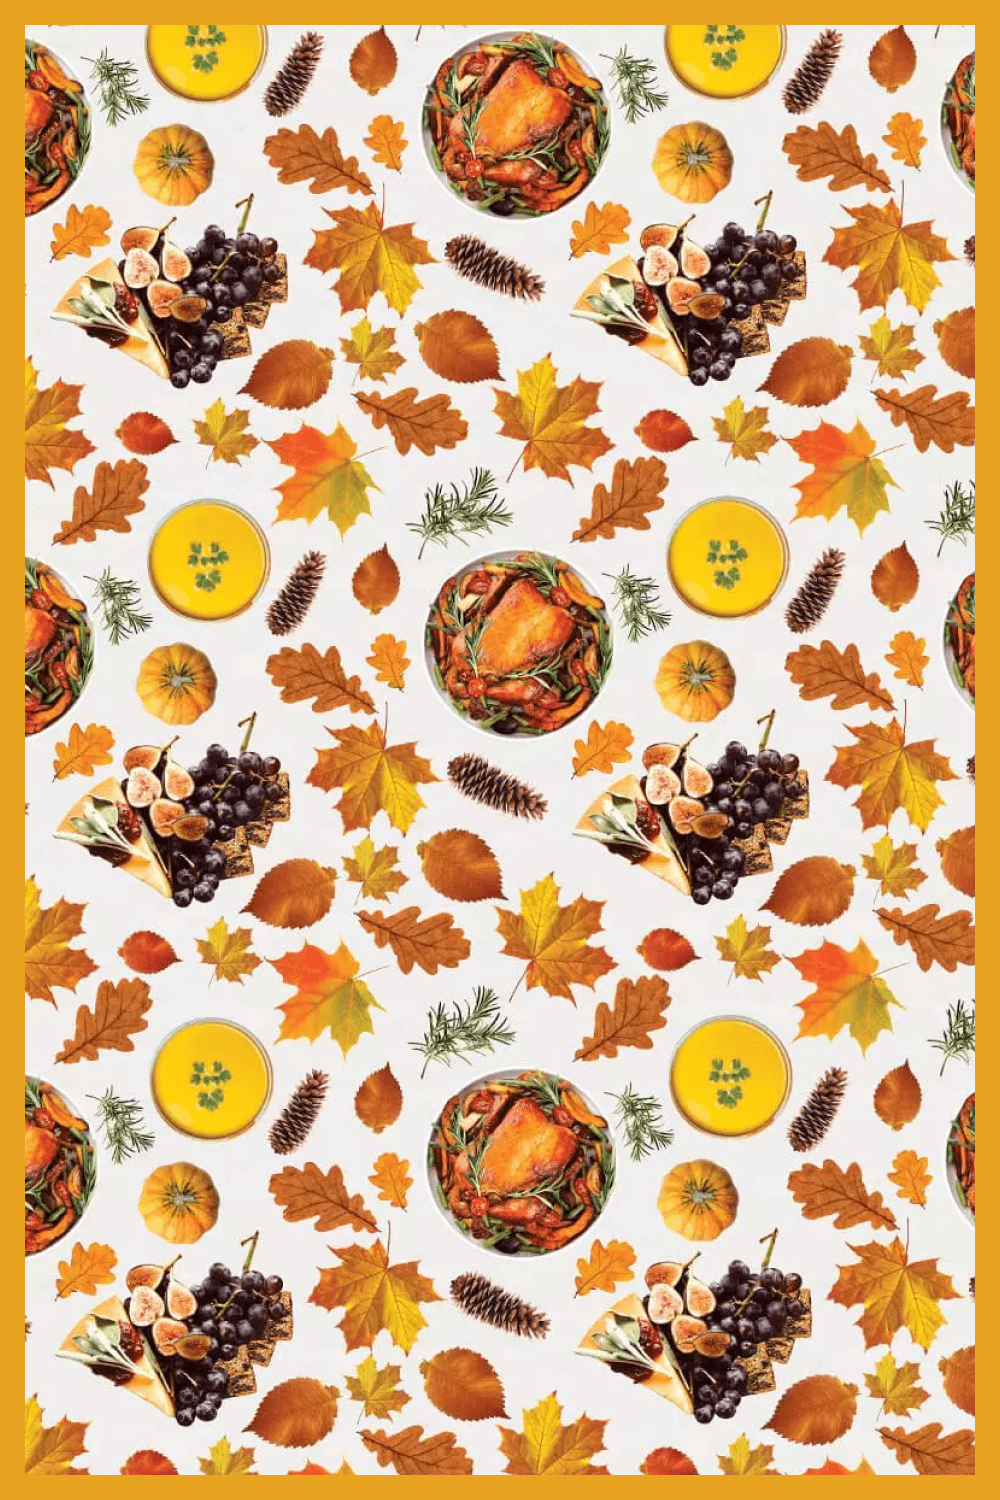 50+ Thanksgiving Textures and Patterns for 2022: Paid and Free